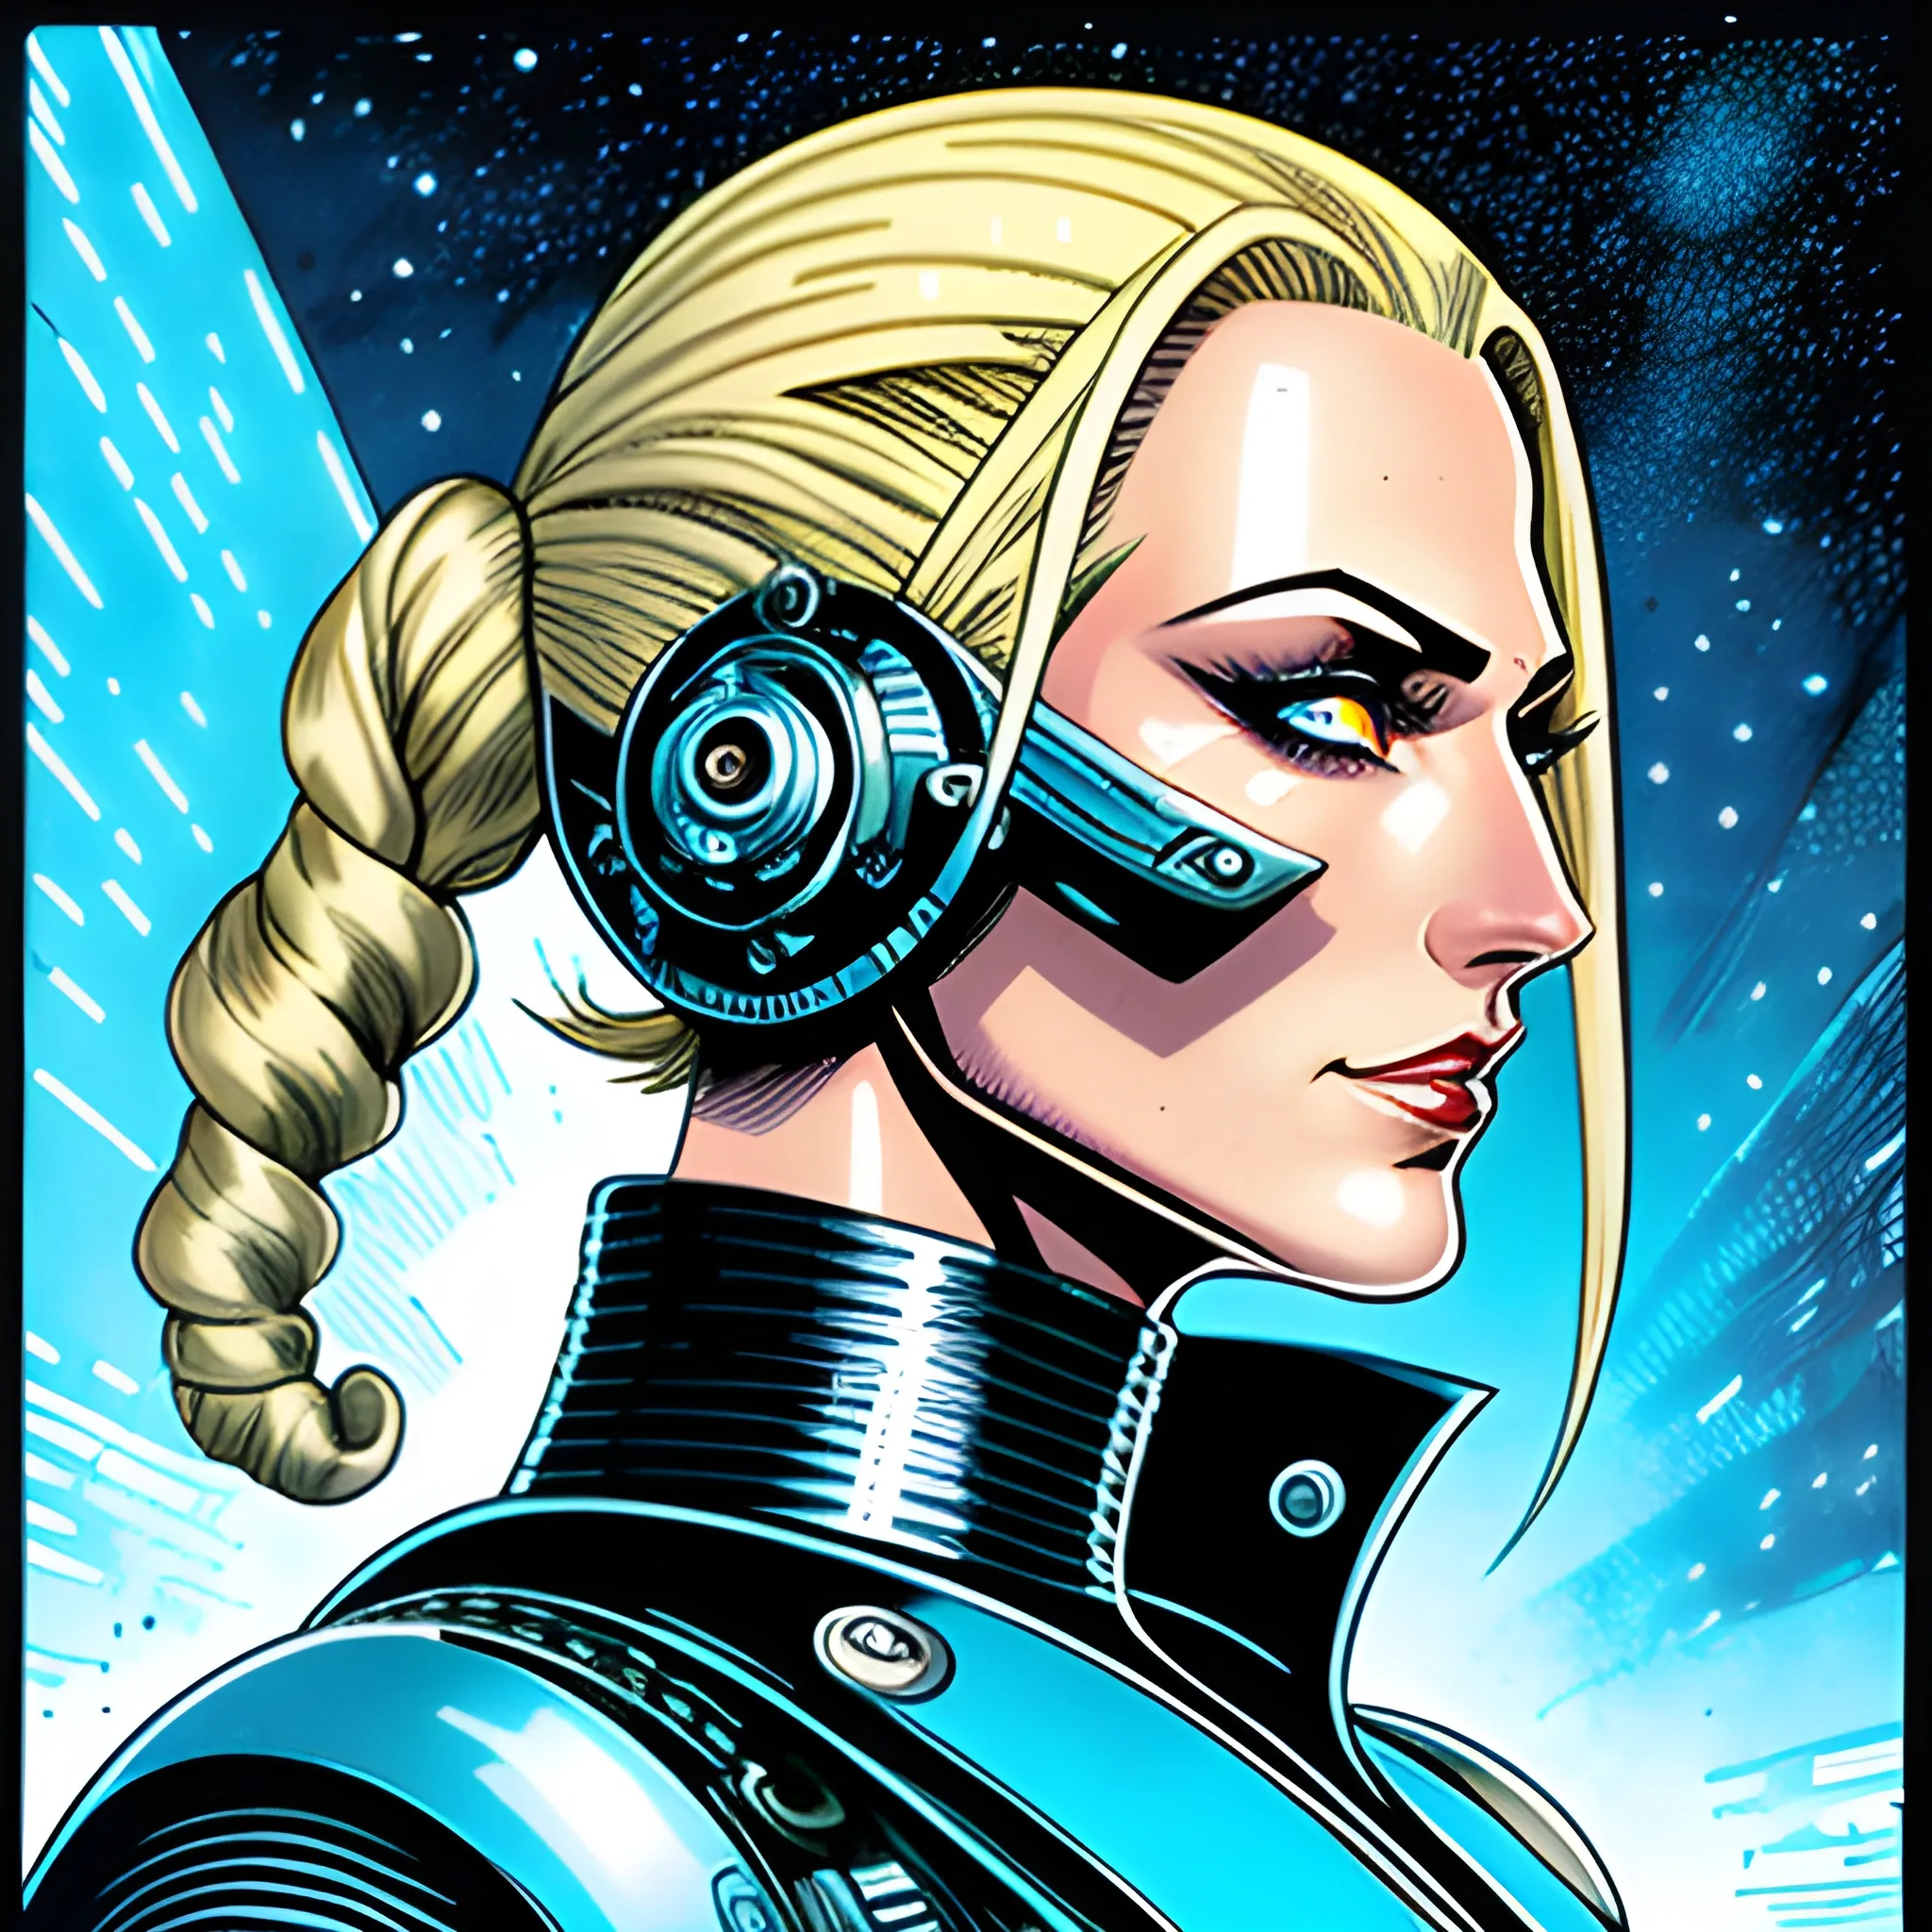 full body, futuristic steampunk giant starship, macro art, portrait of stern anime girl blonde hair blue eyes wearing military nazi ss uniform, ripples, illustration by al williamson, perfect face viewed in profile